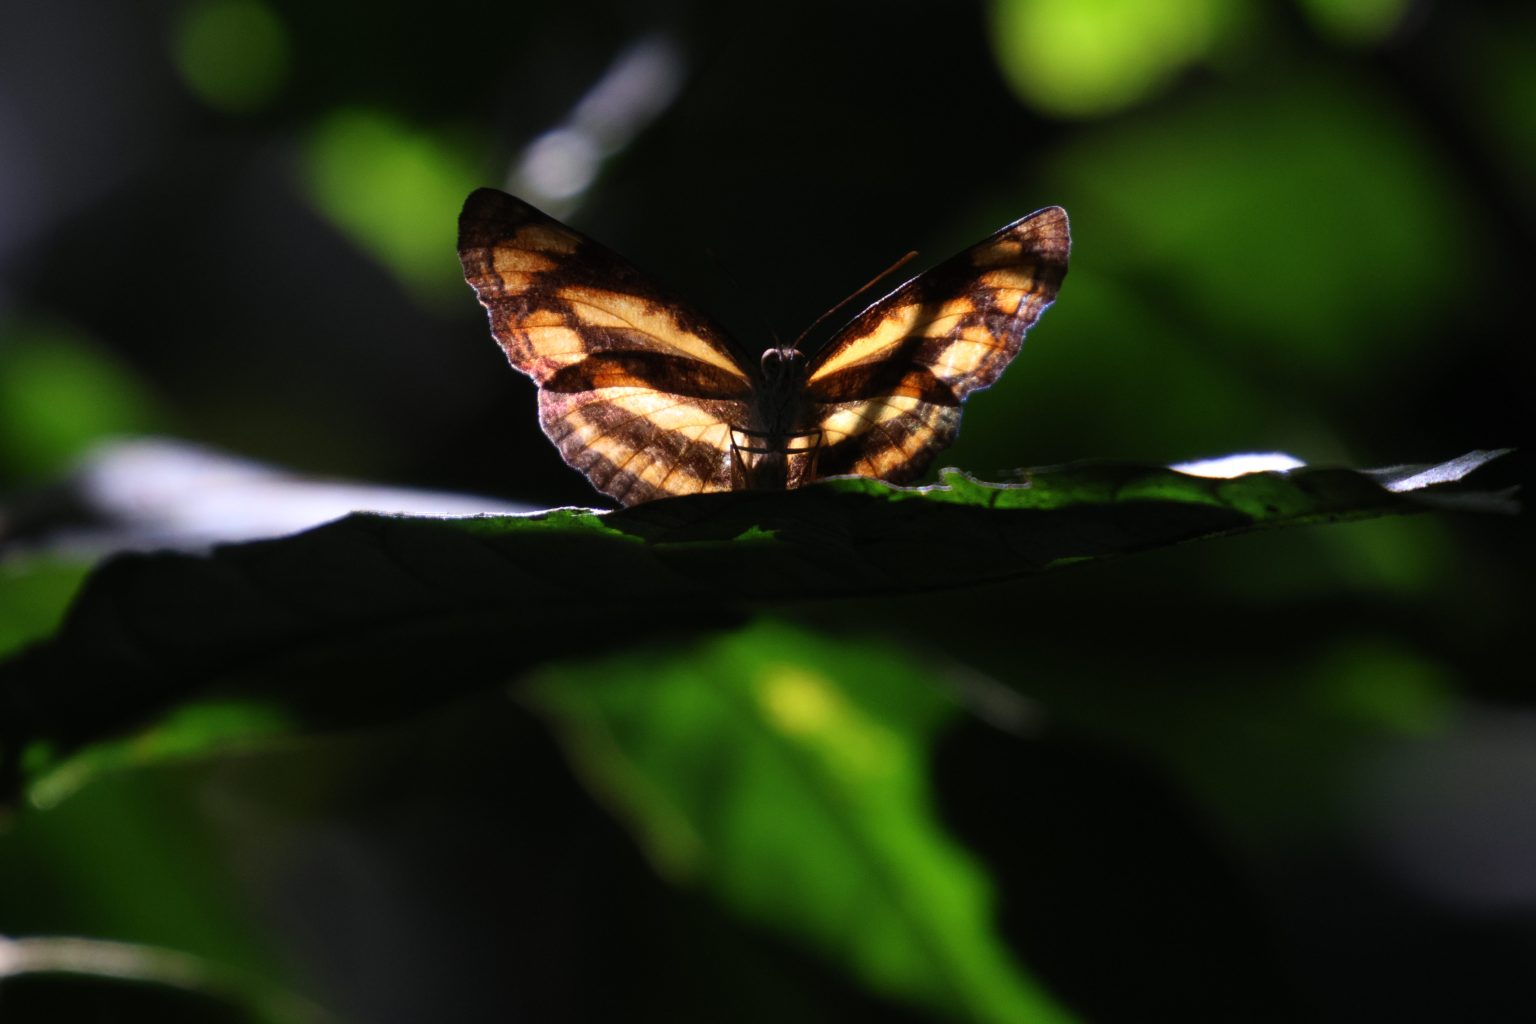 A butterfly standing on a leaf, with back light illuminating its body. Photo taken in Satchhari National Park, Bangladesh, and contributed by Muhammad Yeasin to the WordPress Photo Directory.